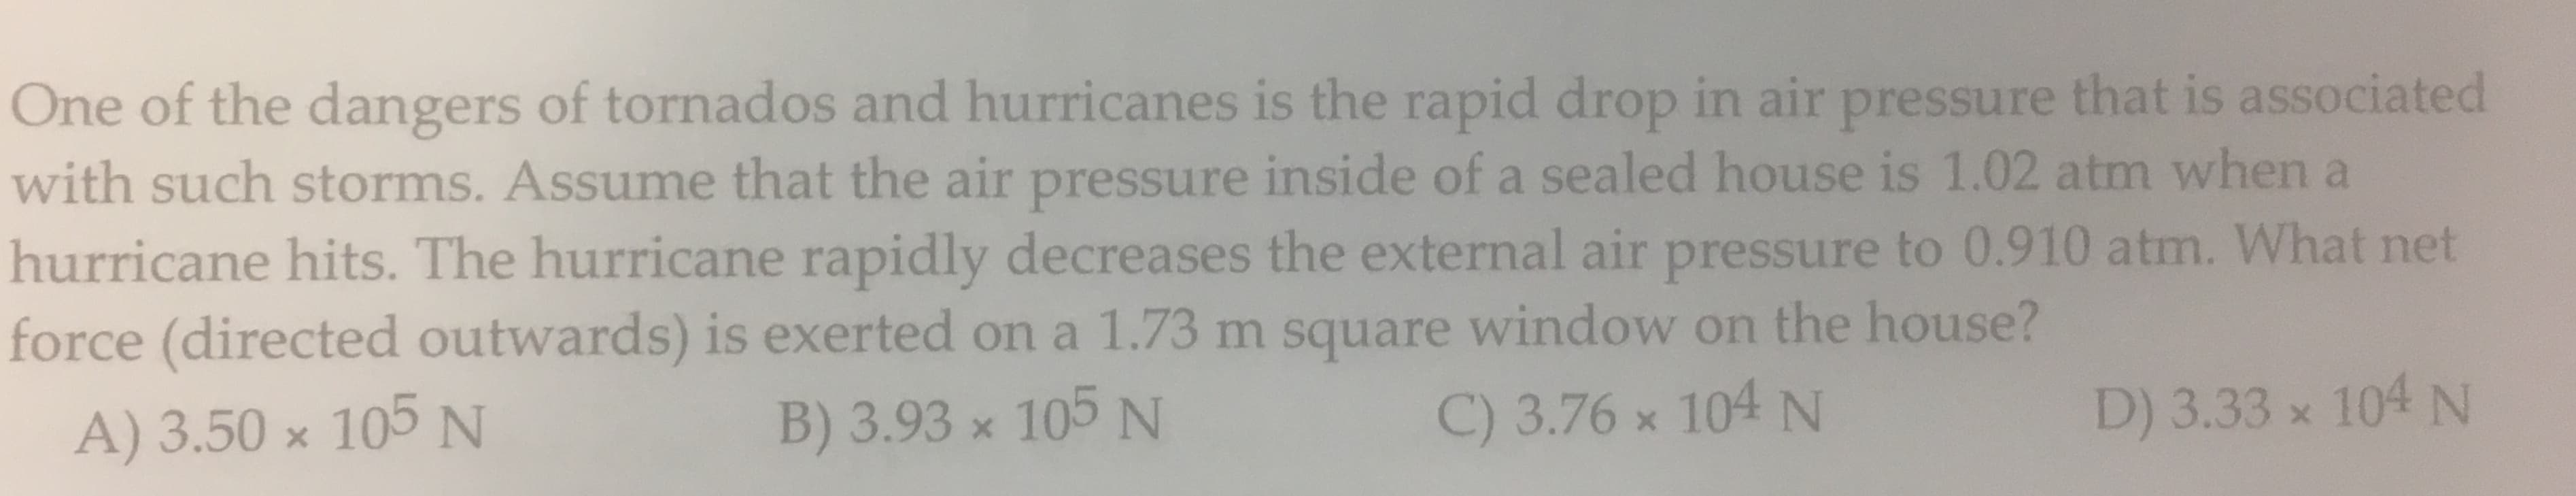 One of the dangers of tornados and hurricanes is the rapid drop in air pressure that is associated
with such storms. Assume that the air pressure inside of a sealed house is 1.02 atm when a
hurricane hits. The hurricane rapidly decreases the external air pressure to 0.910 atm. What net
force (directed outwards) is exerted ona 1.73 m square window on the house?
A) 3.50 x 105 N
104 N
B) 3.93 x 105 N
C) 3.76 x 104 N
D) 3.33 x
